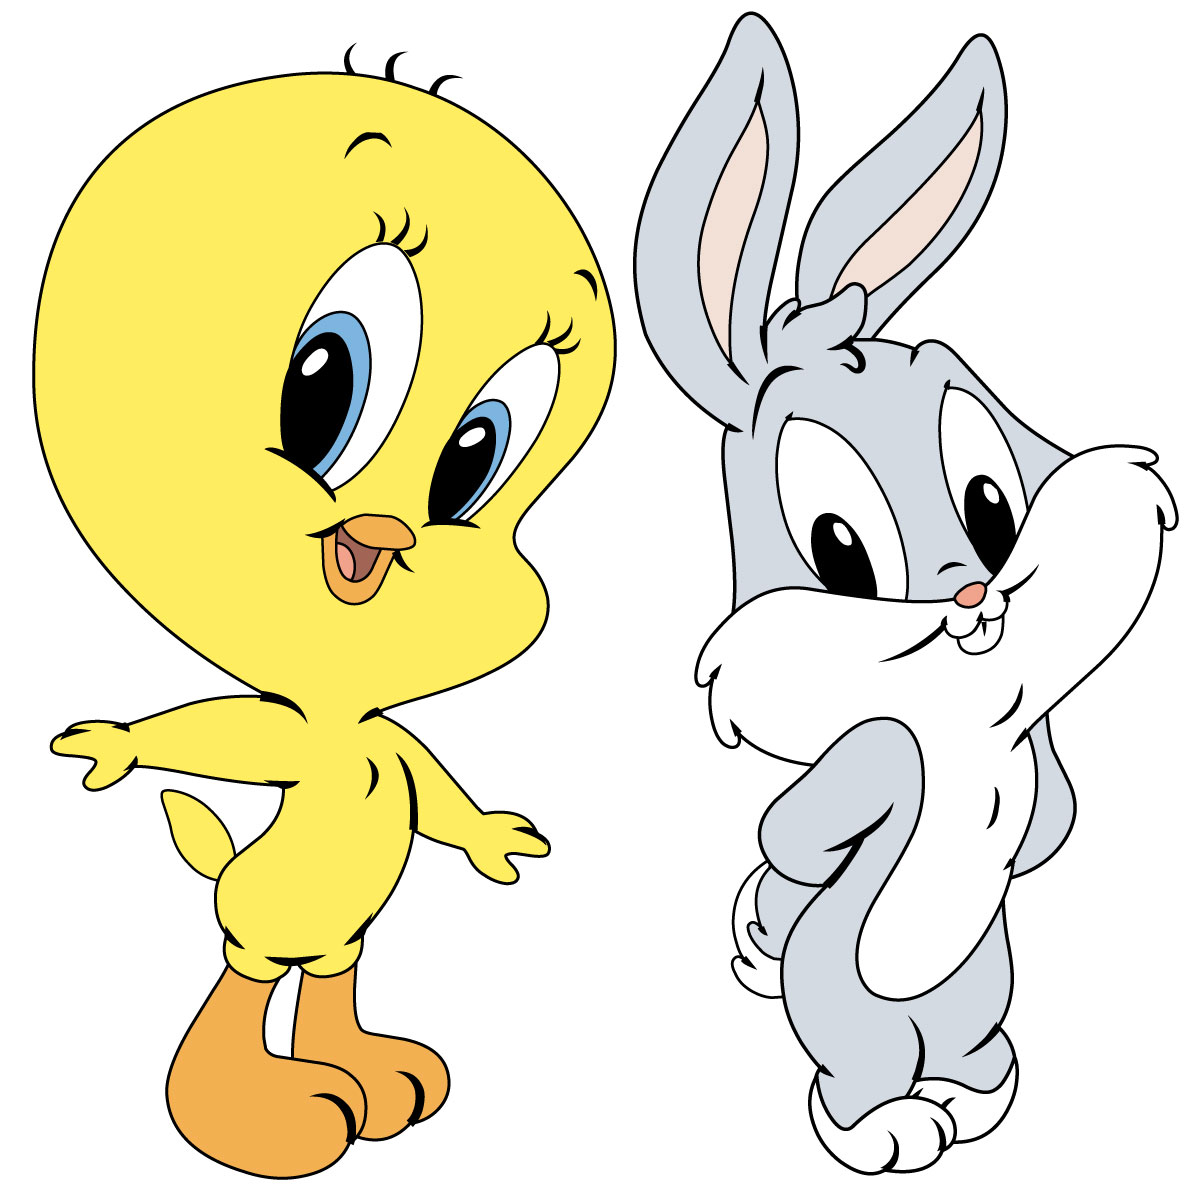 Baby Tweety Bugs Bunny Wall Sticker Decal Easy Remove - Tweety And Bugs Bunny - HD Wallpaper 